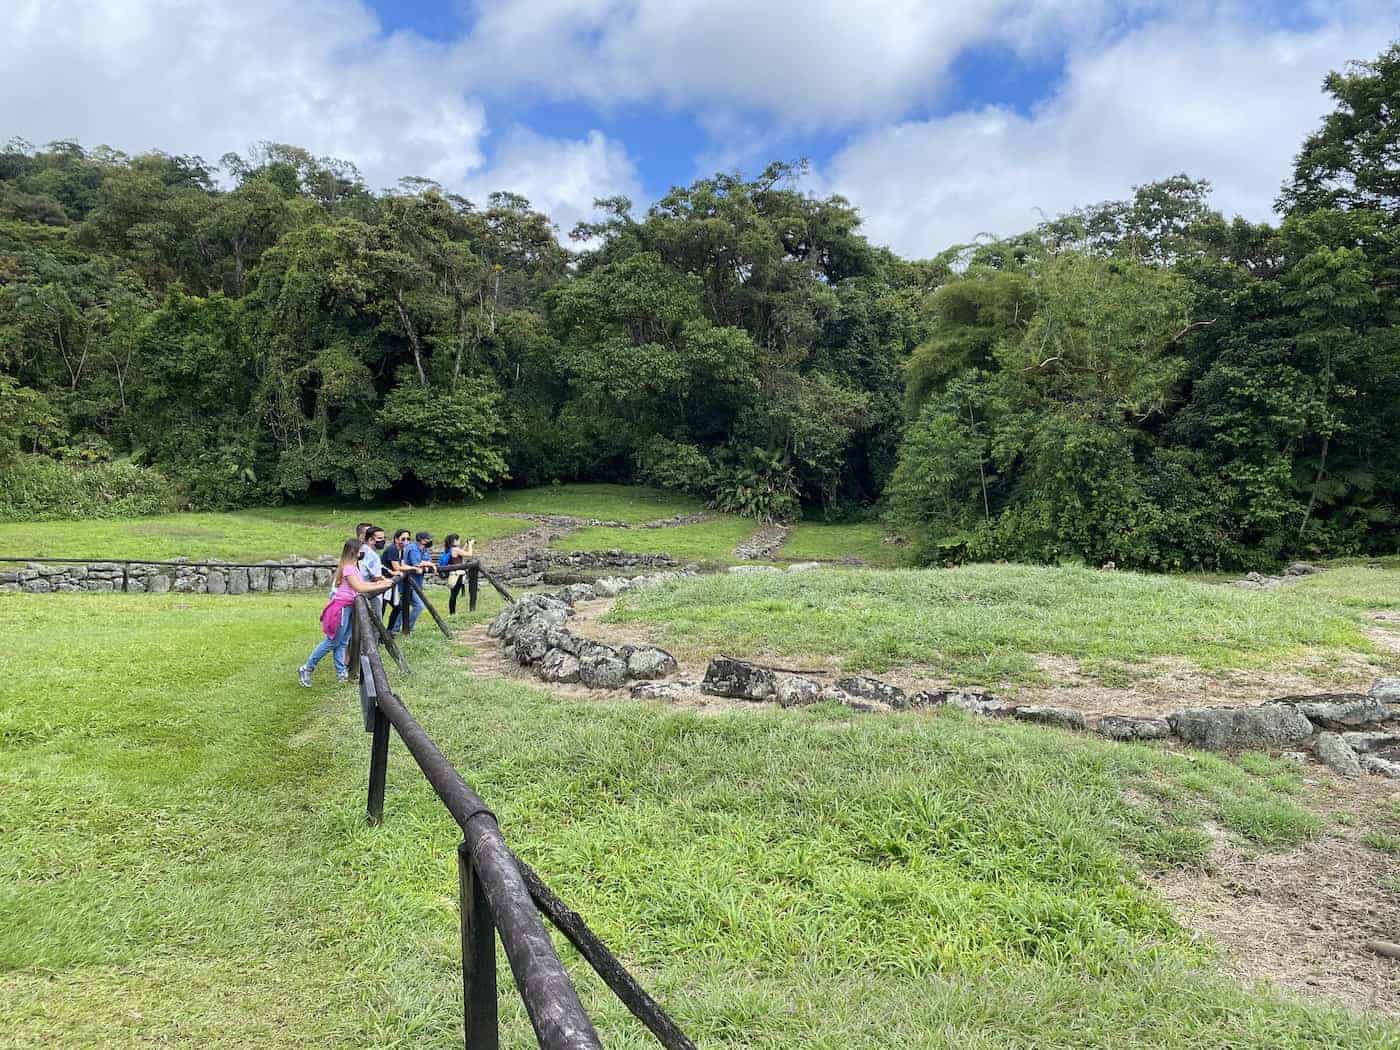 Tourists at Guayabo National Monument in Turrialba, Costa Rica.